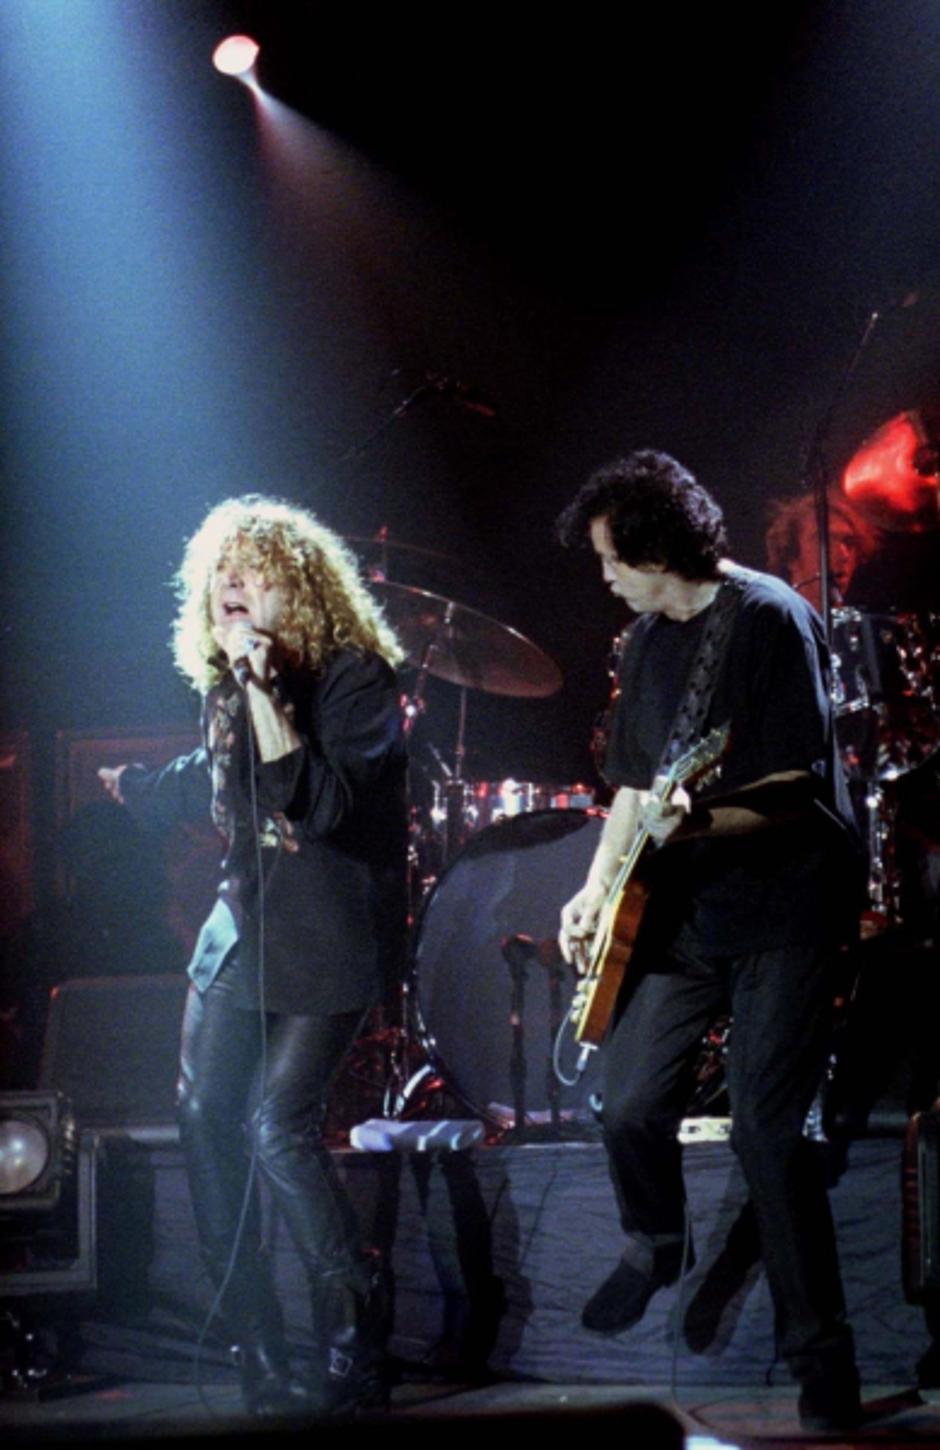 'TO MATCH FEATURE LEISURE-ZEPPELIN - Led Zeppelin band members Robert Plant (L) and Jimmy Page perform at the duo\'s concert in Istanbul in this March 5, 1998 file photograph. Defunct for almost 23 ye